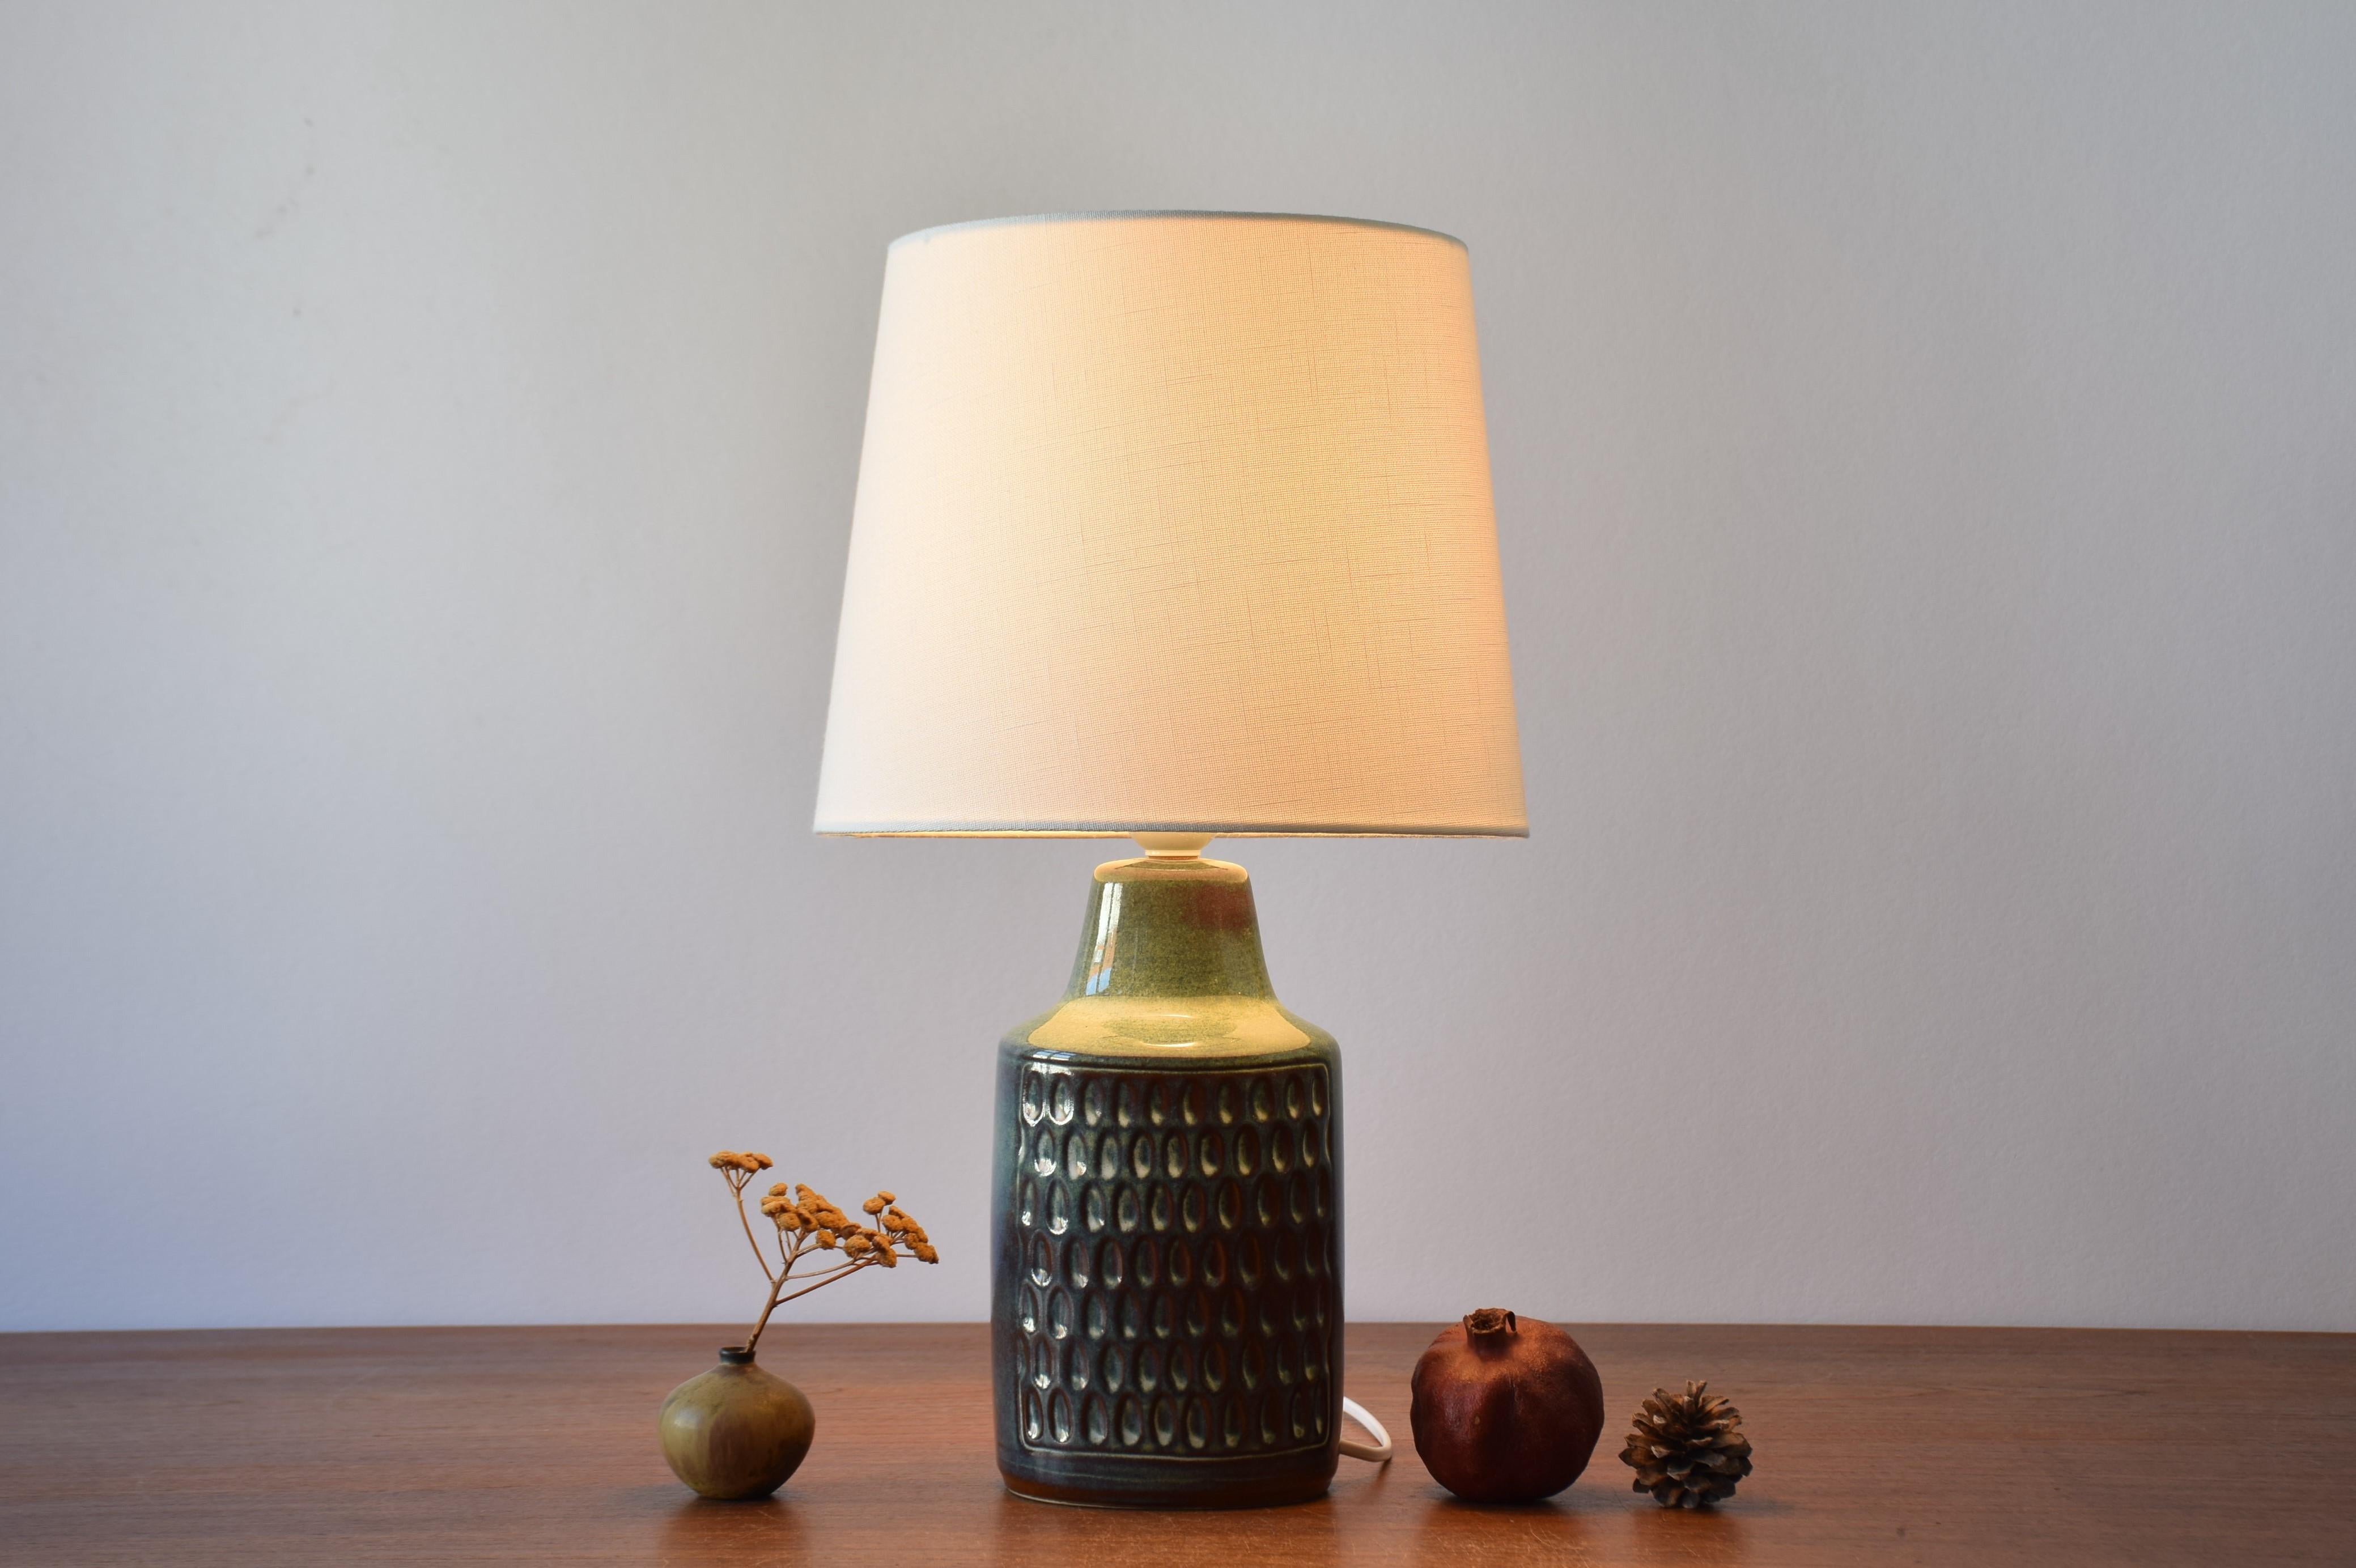 Mid-century Danish ceramic table lamp designed by Einar Johansen for Søholm Stentøj, Denmark. Made circa 1960s.

The lamp has a vivid glossy glaze in a mix of green, brown and beige.. 

Included is a new lamp shade designed and made in Denmark.